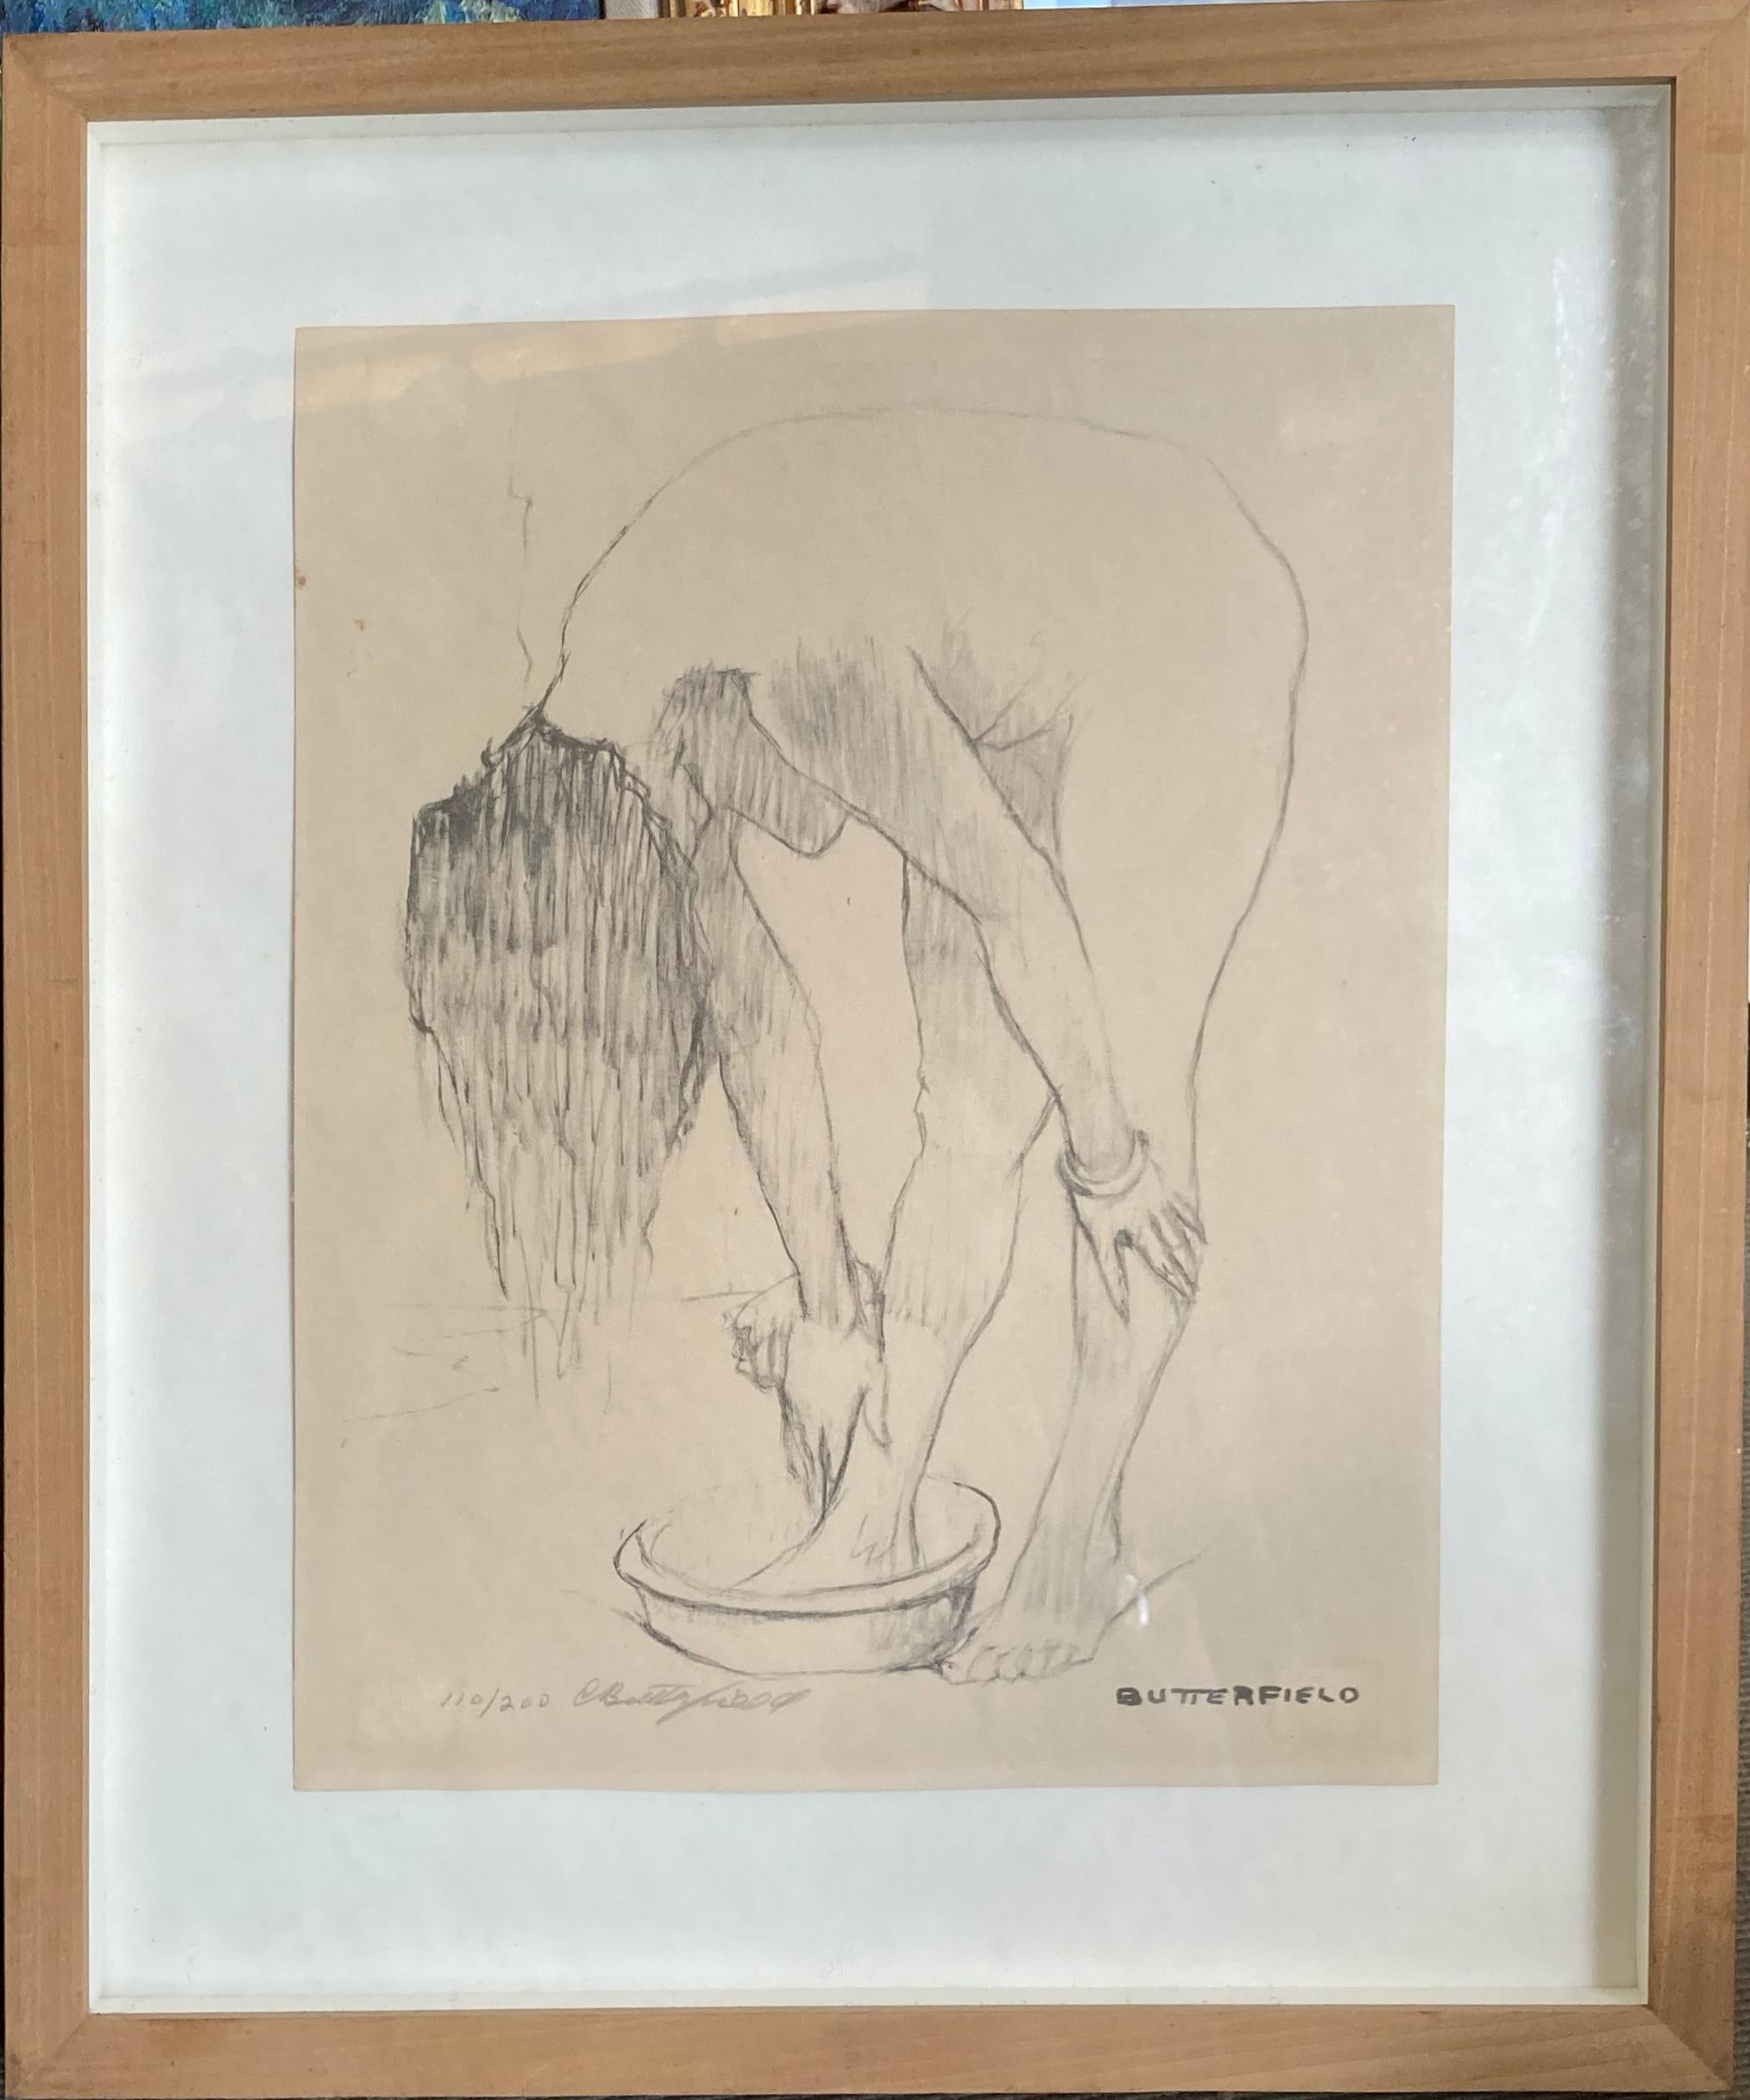 Cortland Butterfield Figurative Print - "Young Woman Washing" - Signed Framed Late 20th Century Nude Print